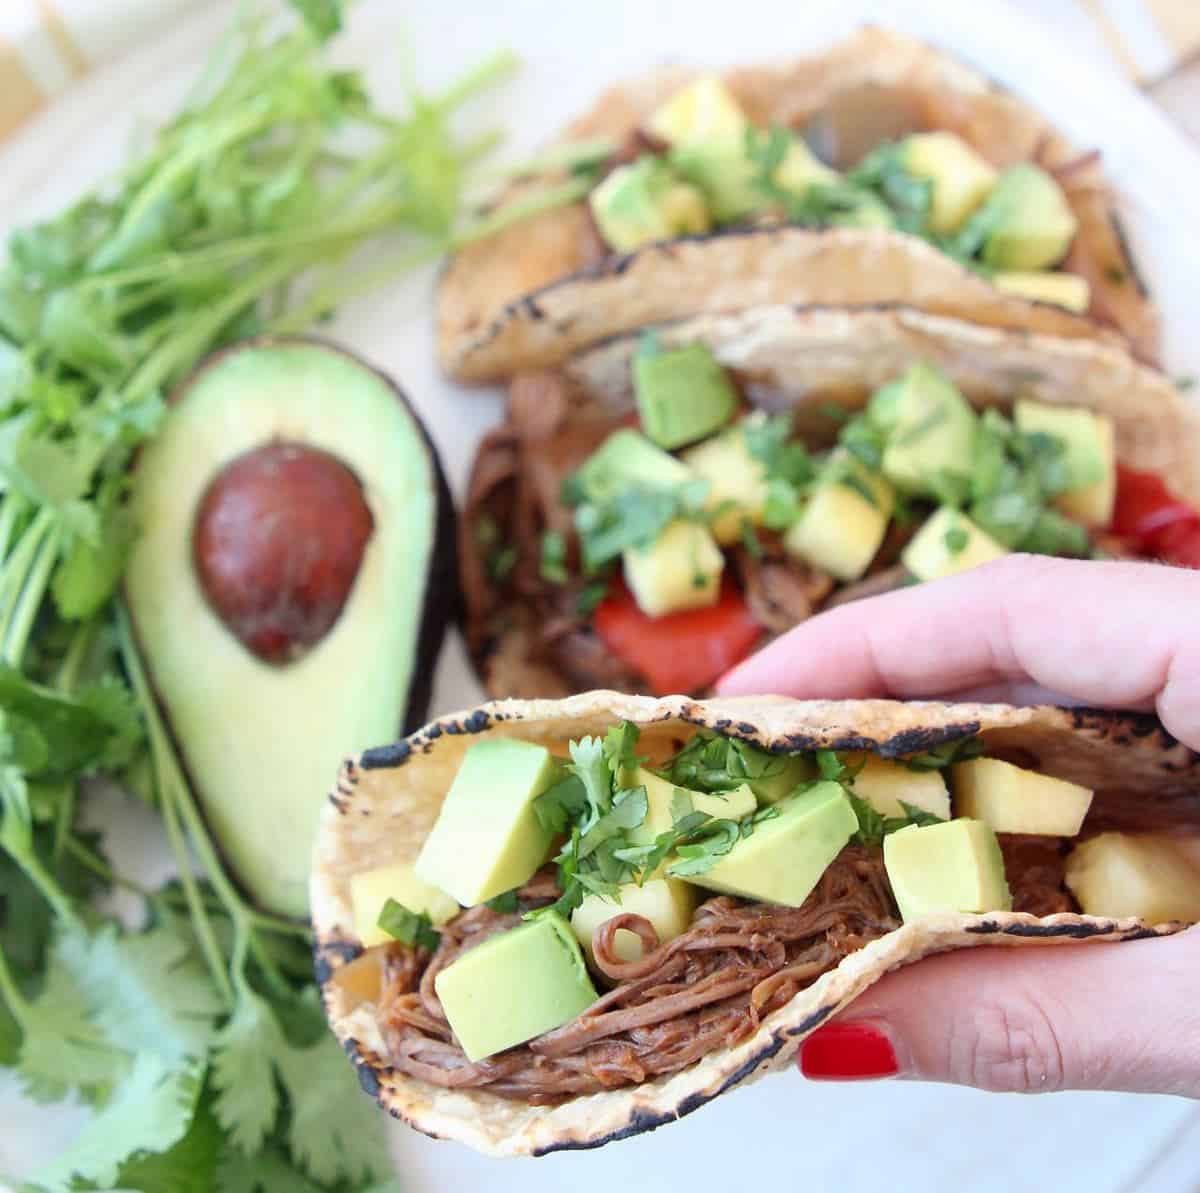 Hand holding taco with shredded tri tip, topped with diced avocado and pineapple